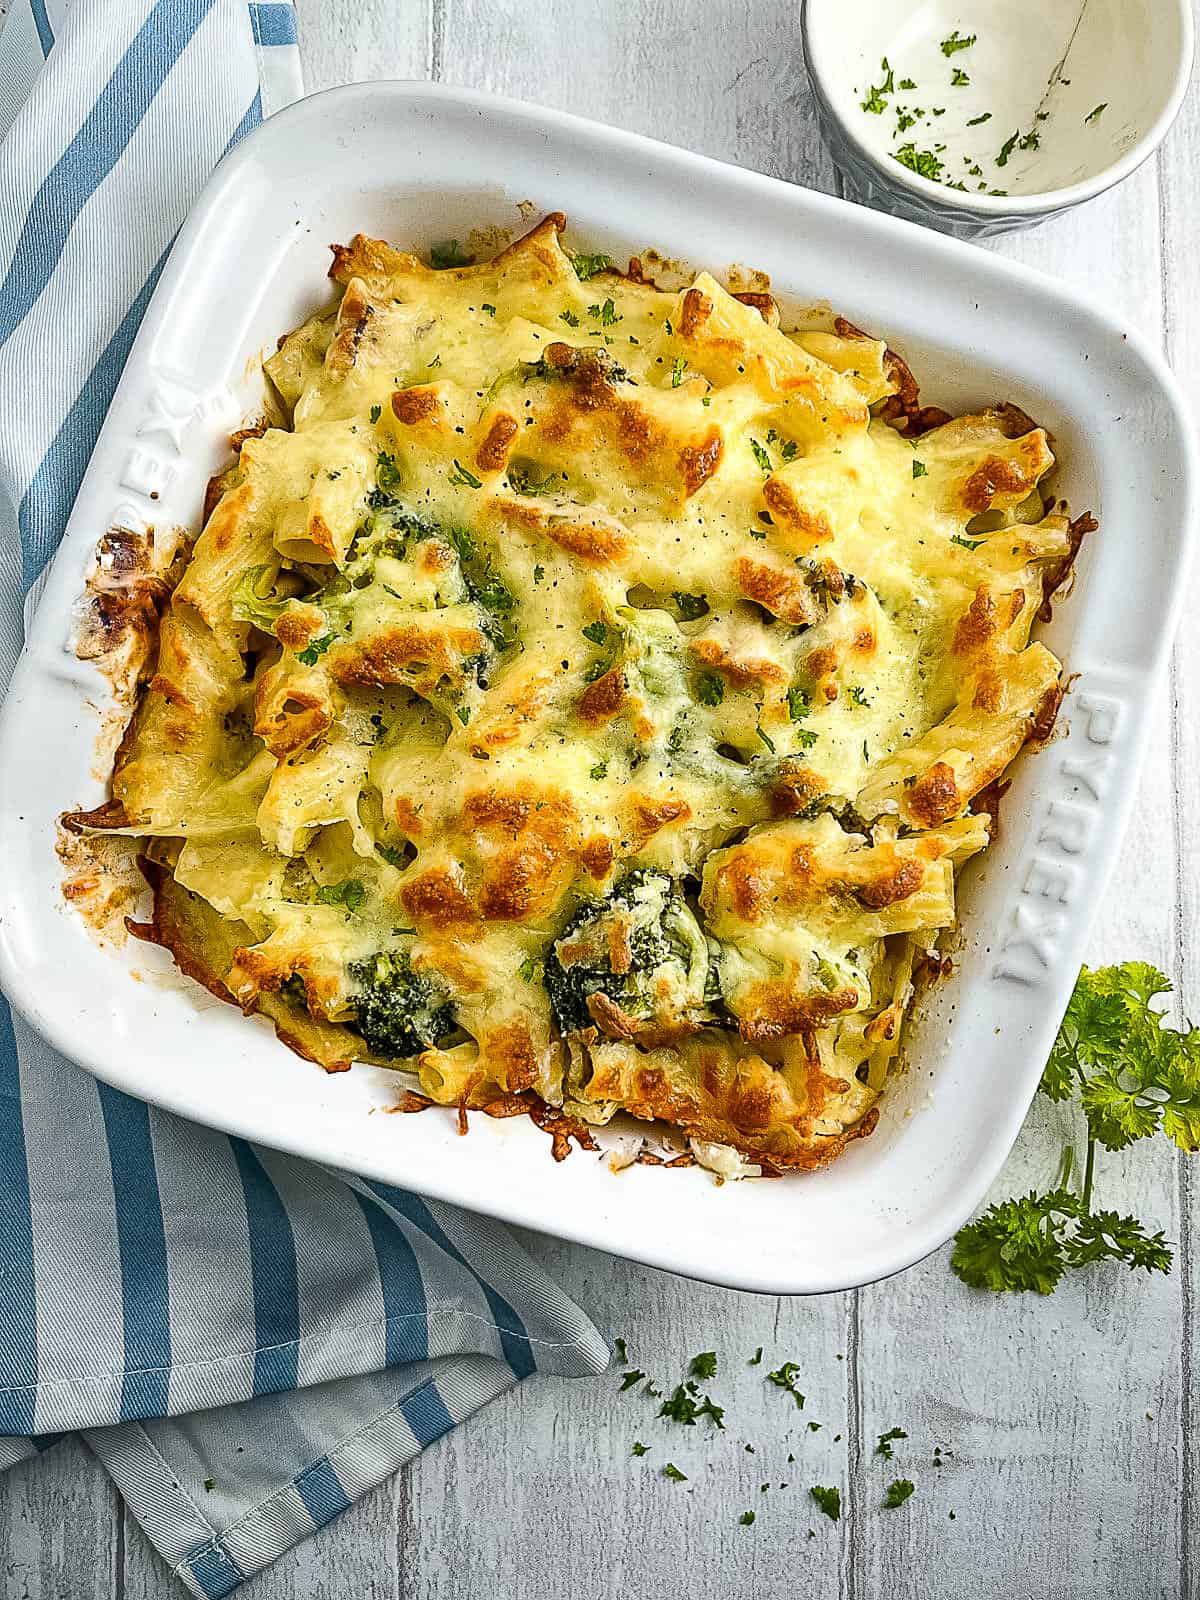 chicken pasta bake with broccoli baked in the oven